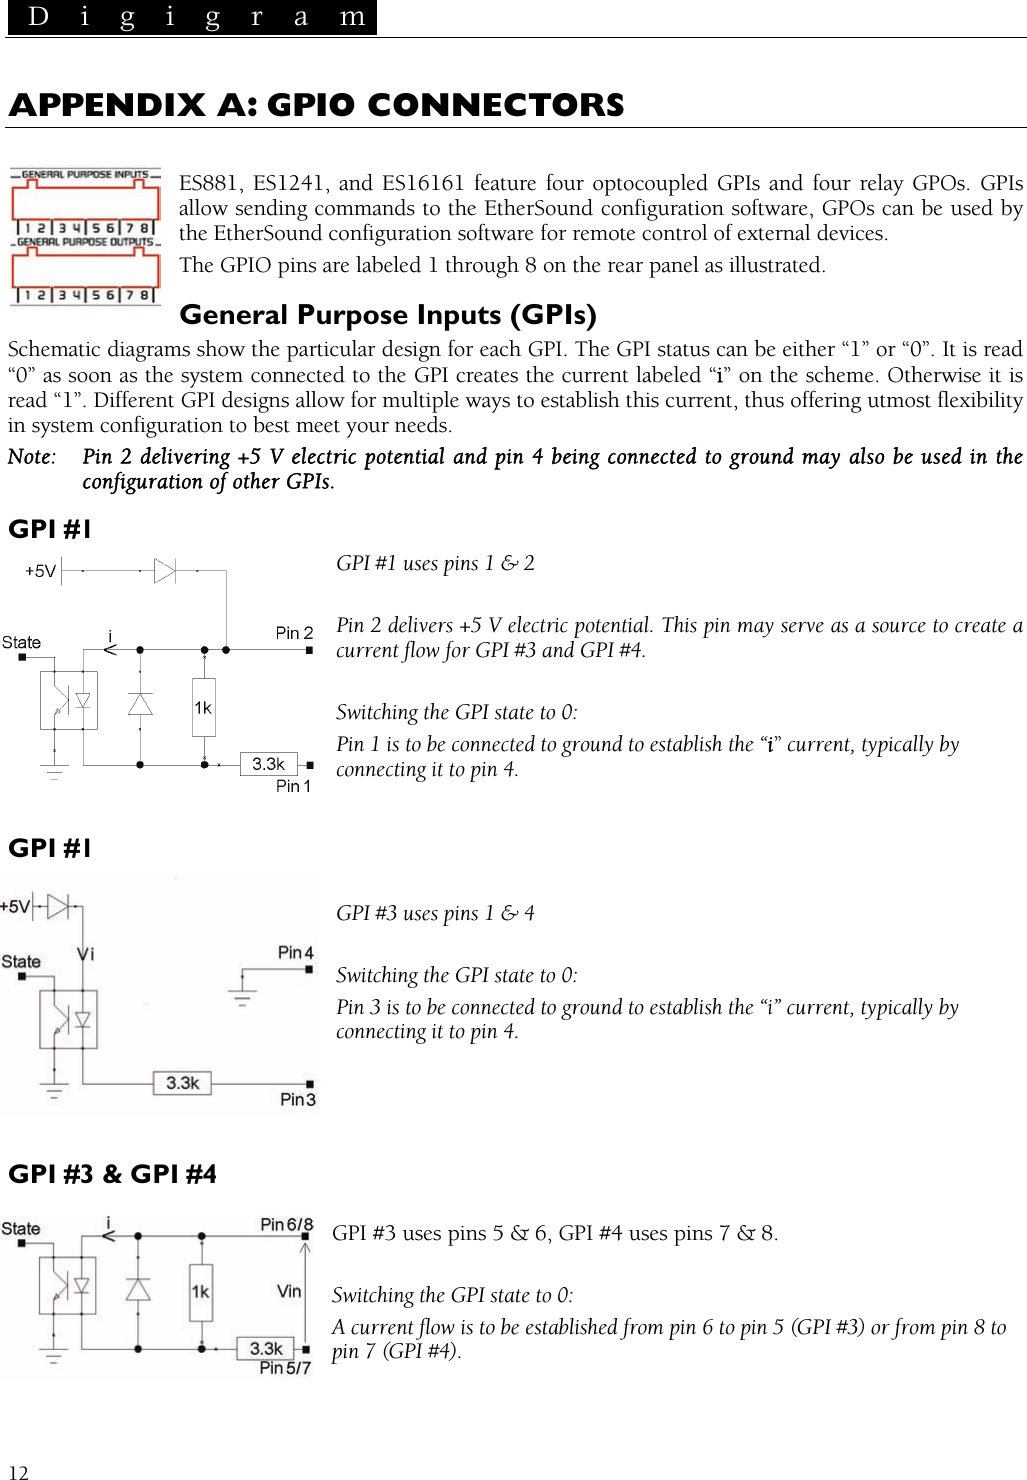  D i g i g r a m   12 APPENDIX A: GPIO CONNECTORS  ES881, ES1241, and ES16161 feature four optocoupled GPIs and four relay GPOs. GPIs allow sending commands to the EtherSound configuration software, GPOs can be used by the EtherSound configuration software for remote control of external devices. The GPIO pins are labeled 1 through 8 on the rear panel as illustrated. General Purpose Inputs (GPIs) Schematic diagrams show the particular design for each GPI. The GPI status can be either “1” or “0”. It is read “0” as soon as the system connected to the GPI creates the current labeled “i” on the scheme. Otherwise it is read “1”. Different GPI designs allow for multiple ways to establish this current, thus offering utmost flexibility in system configuration to best meet your needs. Note:  Pin 2 delivering +5 V electric potential and pin 4 being connected to ground may also be used in the configuration of other GPIs. GPI #1 GPI #1 uses pins 1 &amp; 2  Pin 2 delivers +5 V electric potential. This pin may serve as a source to create a current flow for GPI #3 and GPI #4.  Switching the GPI state to 0: Pin 1 is to be connected to ground to establish the “i” current, typically by connecting it to pin 4.  GPI #1  GPI #3 uses pins 1 &amp; 4  Switching the GPI state to 0: Pin 3 is to be connected to ground to establish the “i” current, typically by connecting it to pin 4.    GPI #3 &amp; GPI #4  GPI #3 uses pins 5 &amp; 6, GPI #4 uses pins 7 &amp; 8.  Switching the GPI state to 0: A current flow is to be established from pin 6 to pin 5 (GPI #3) or from pin 8 to pin 7 (GPI #4). 